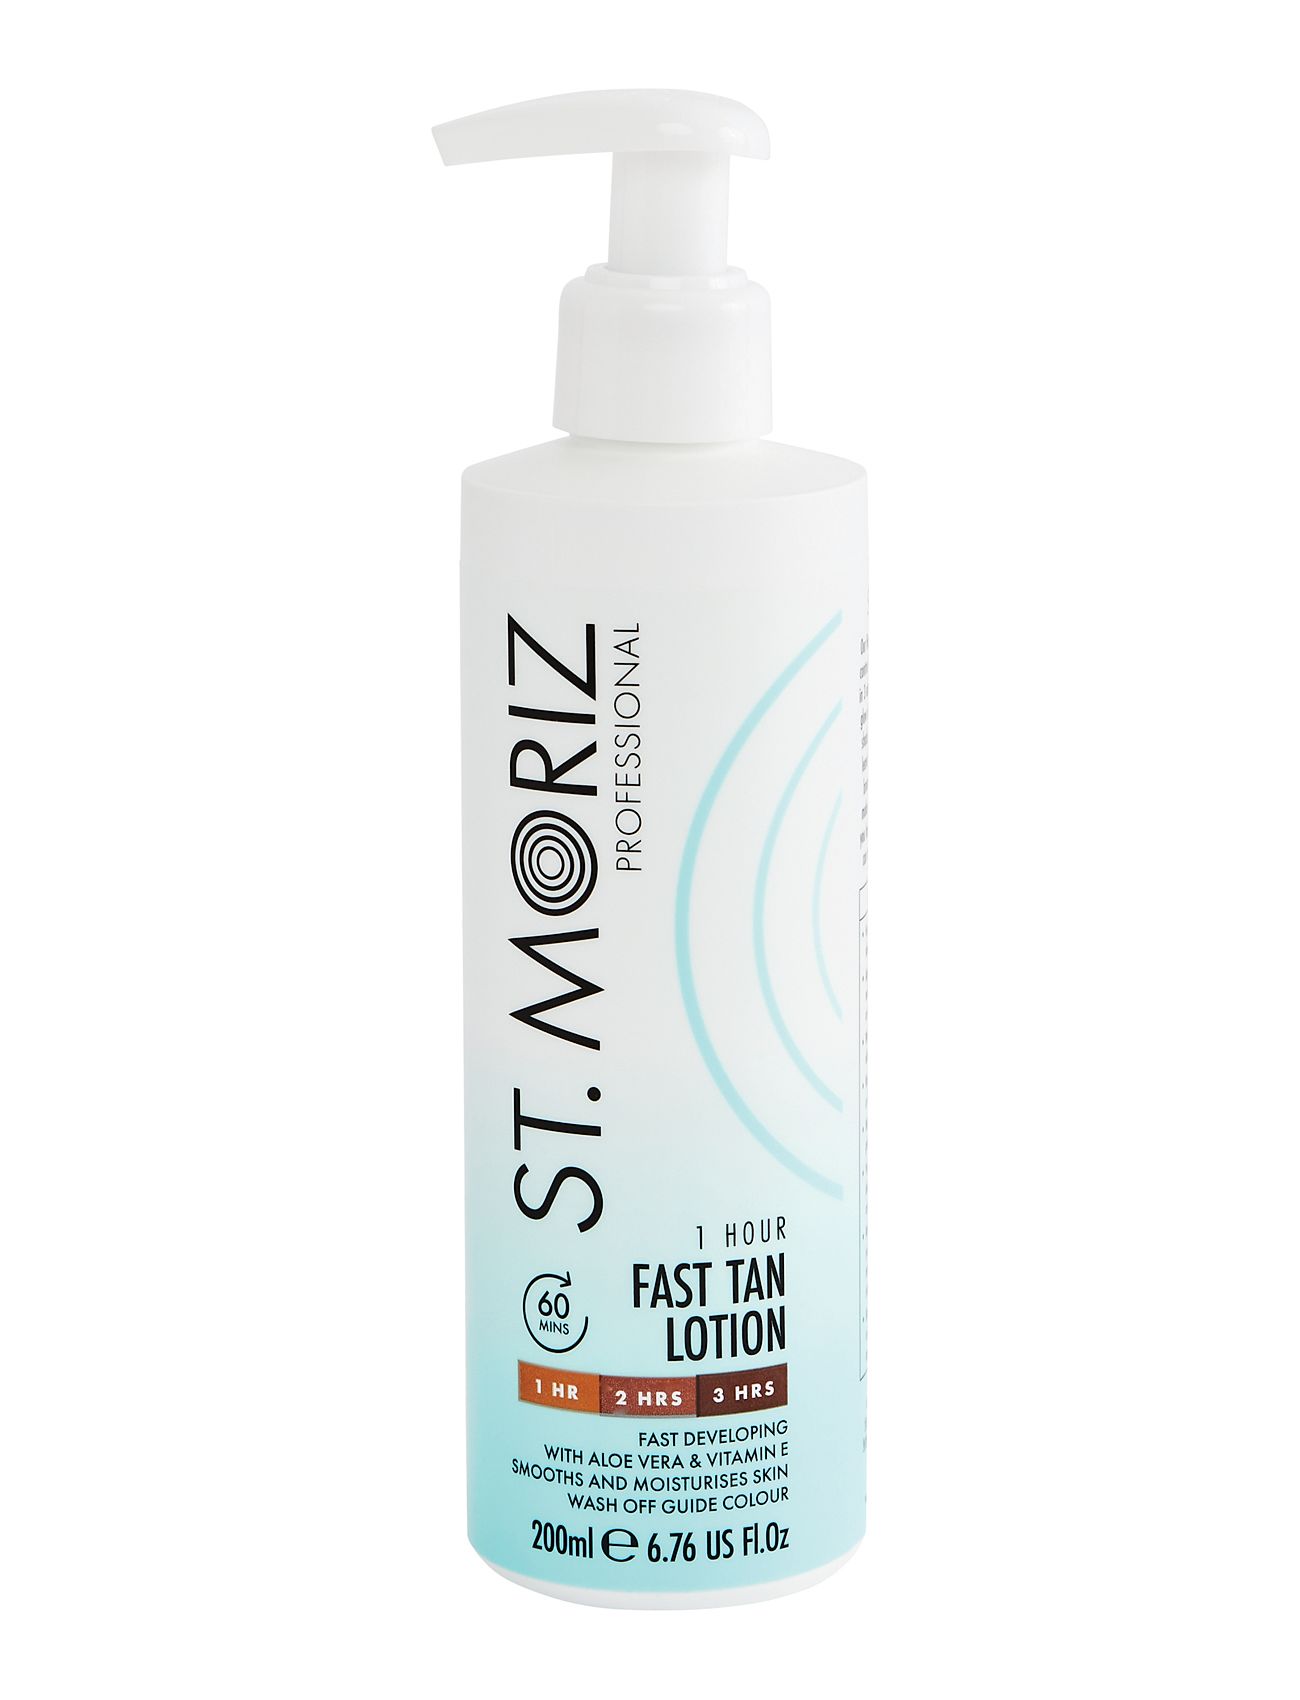 Pro 1 Hour Fast Tan Lotion 200 Ml Beauty Women Skin Care Sun Products Self Tanners Lotions Nude St. Moriz